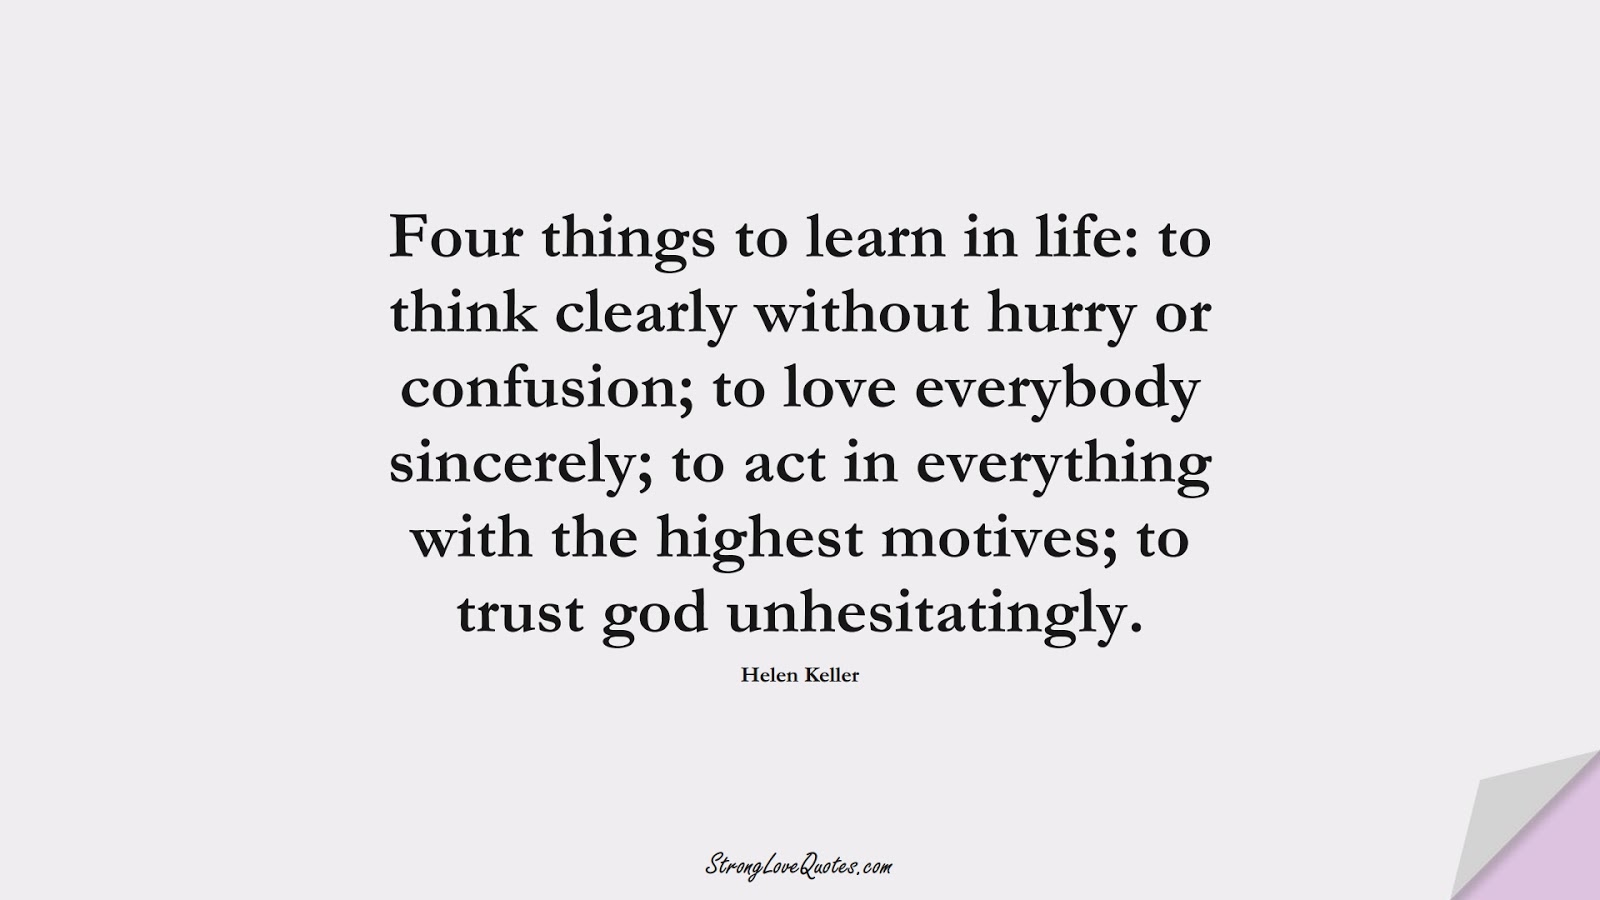 Four things to learn in life: to think clearly without hurry or confusion; to love everybody sincerely; to act in everything with the highest motives; to trust god unhesitatingly. (Helen Keller);  #LearningQuotes